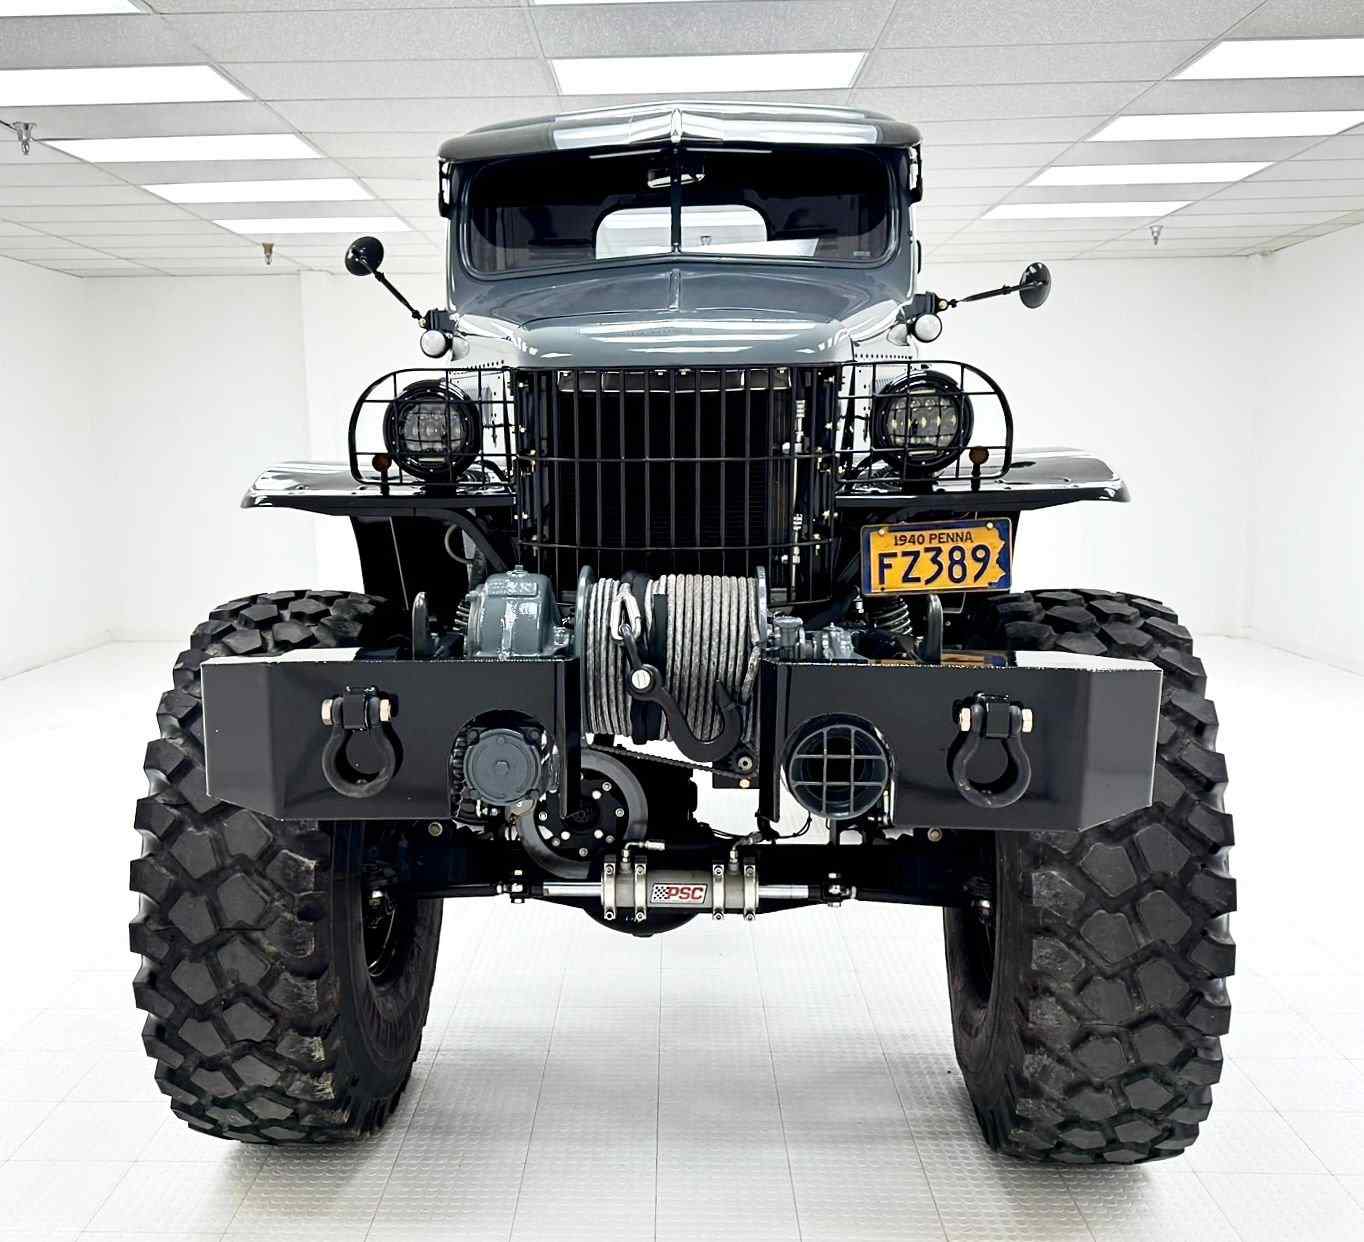 1940-dodge-series-vc-g502-power-wagon-pickup-for-sale-08